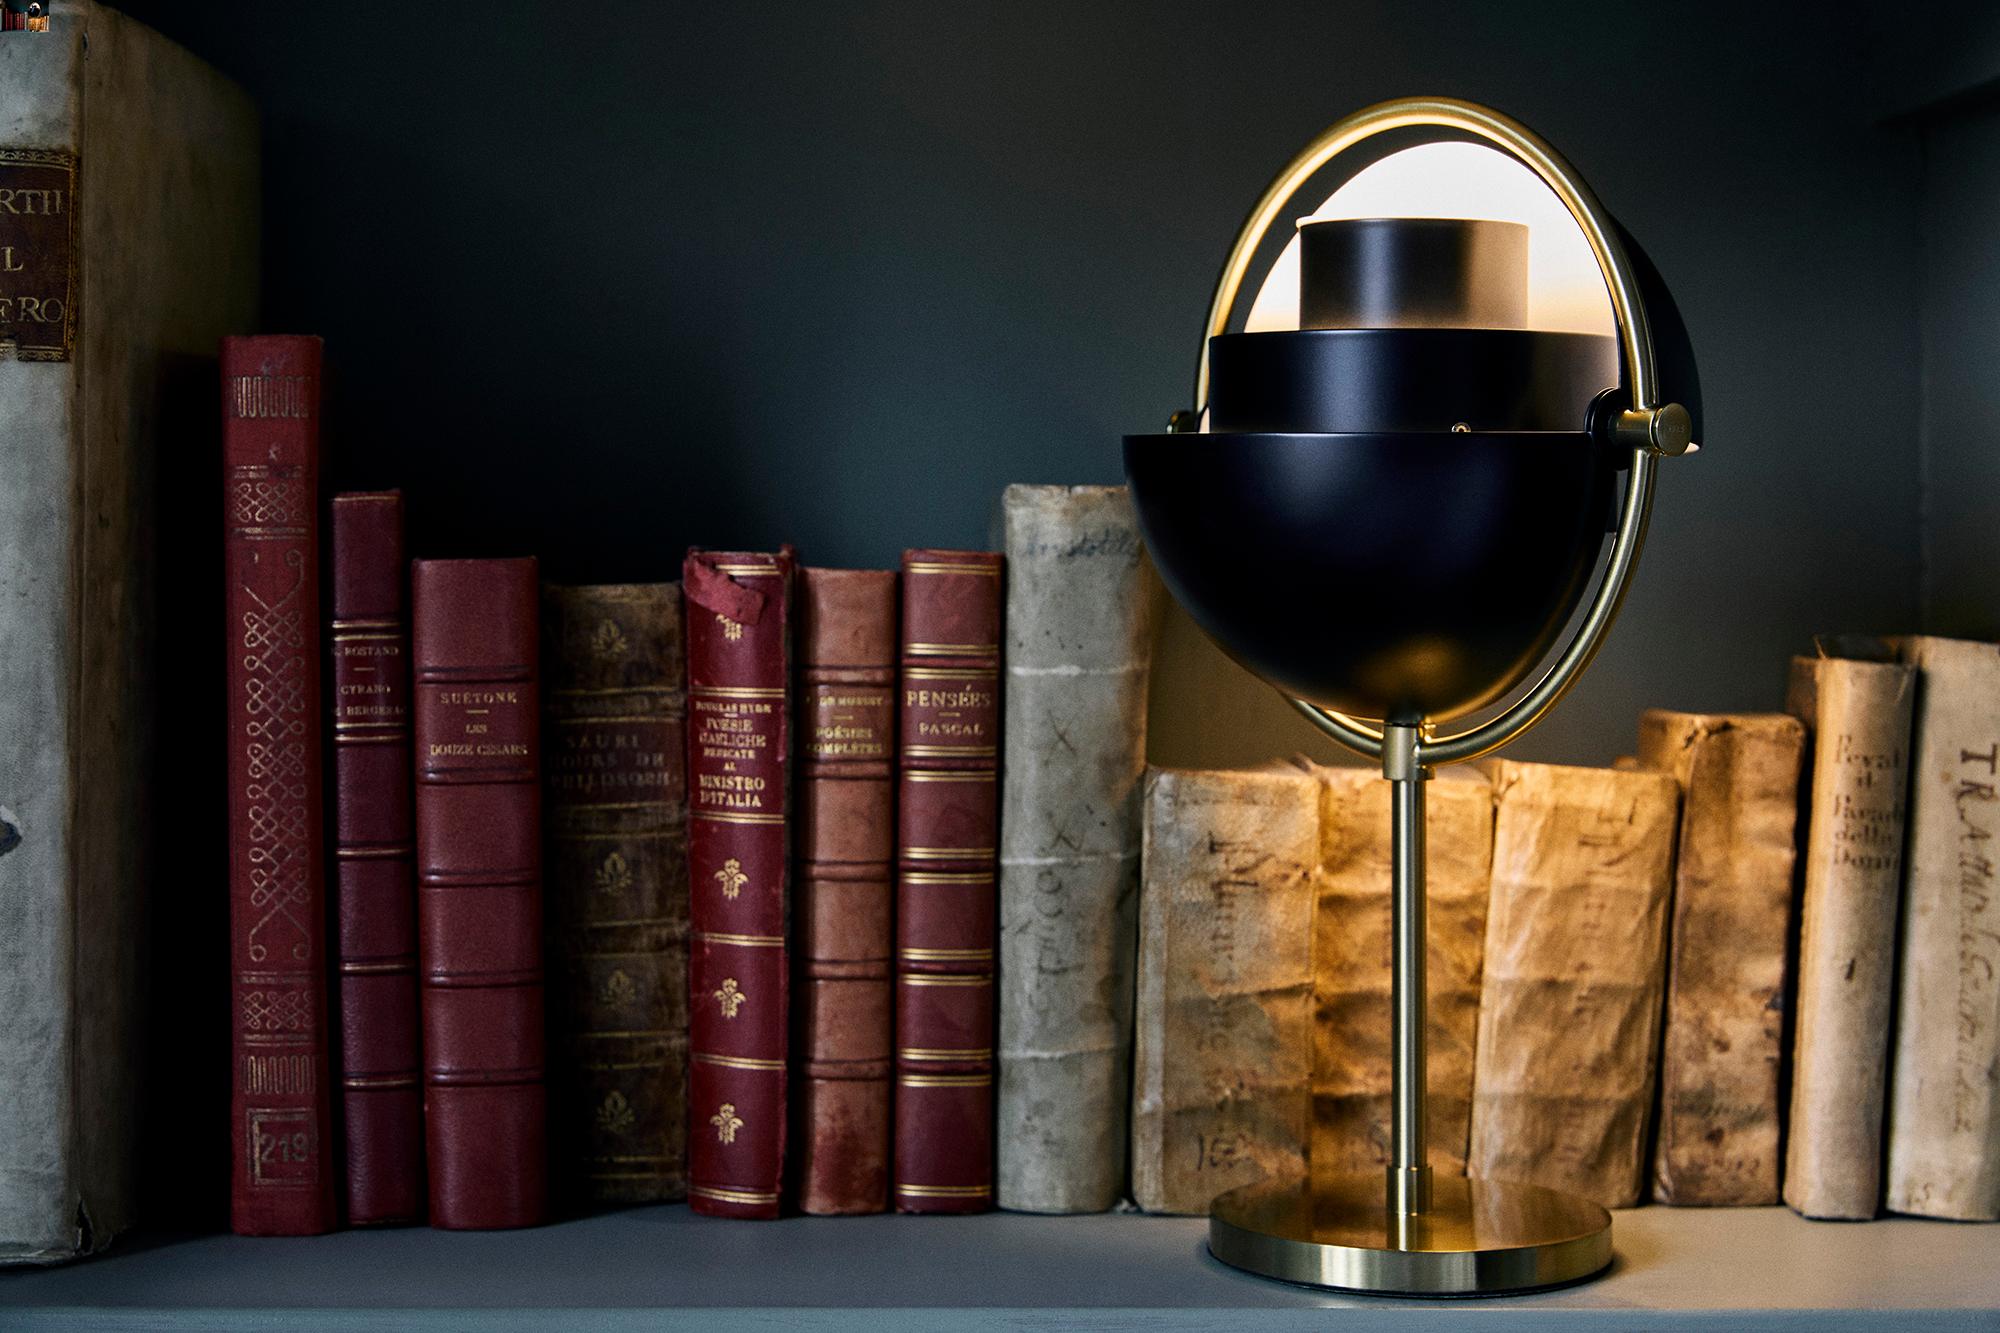 Louis Weisdorf 'Multi-Lite' Portable Table Lamp in Black.

Designed in 1972 by Weisdorf, this new portable version of Weisdorf's iconic design was created by GUBI of Denmark, who meticulously reproduce his work with scrupulous attention to detail